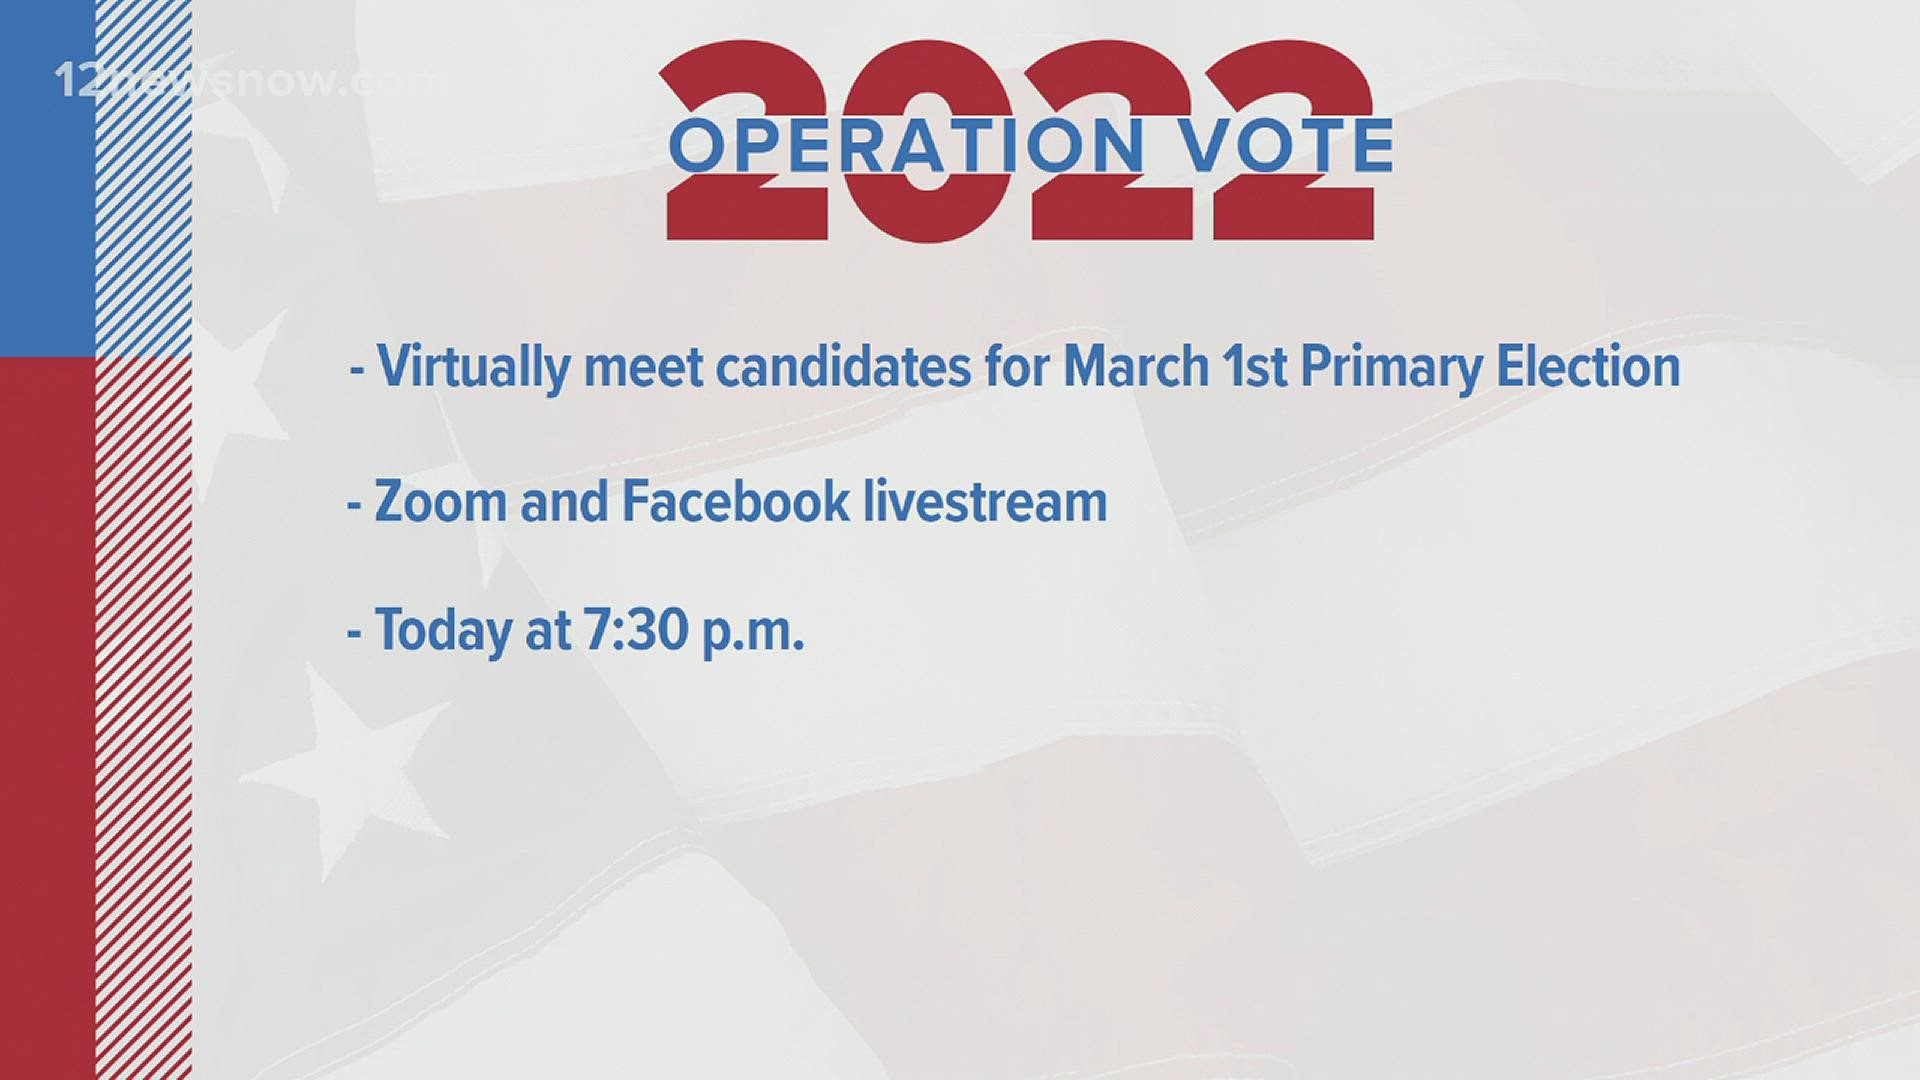 The meeting will take place Tuesday, Feb. 8 at 7:30 p.m. via Zoom, in an effort to increase the number of educated, informed voters about the candidates.